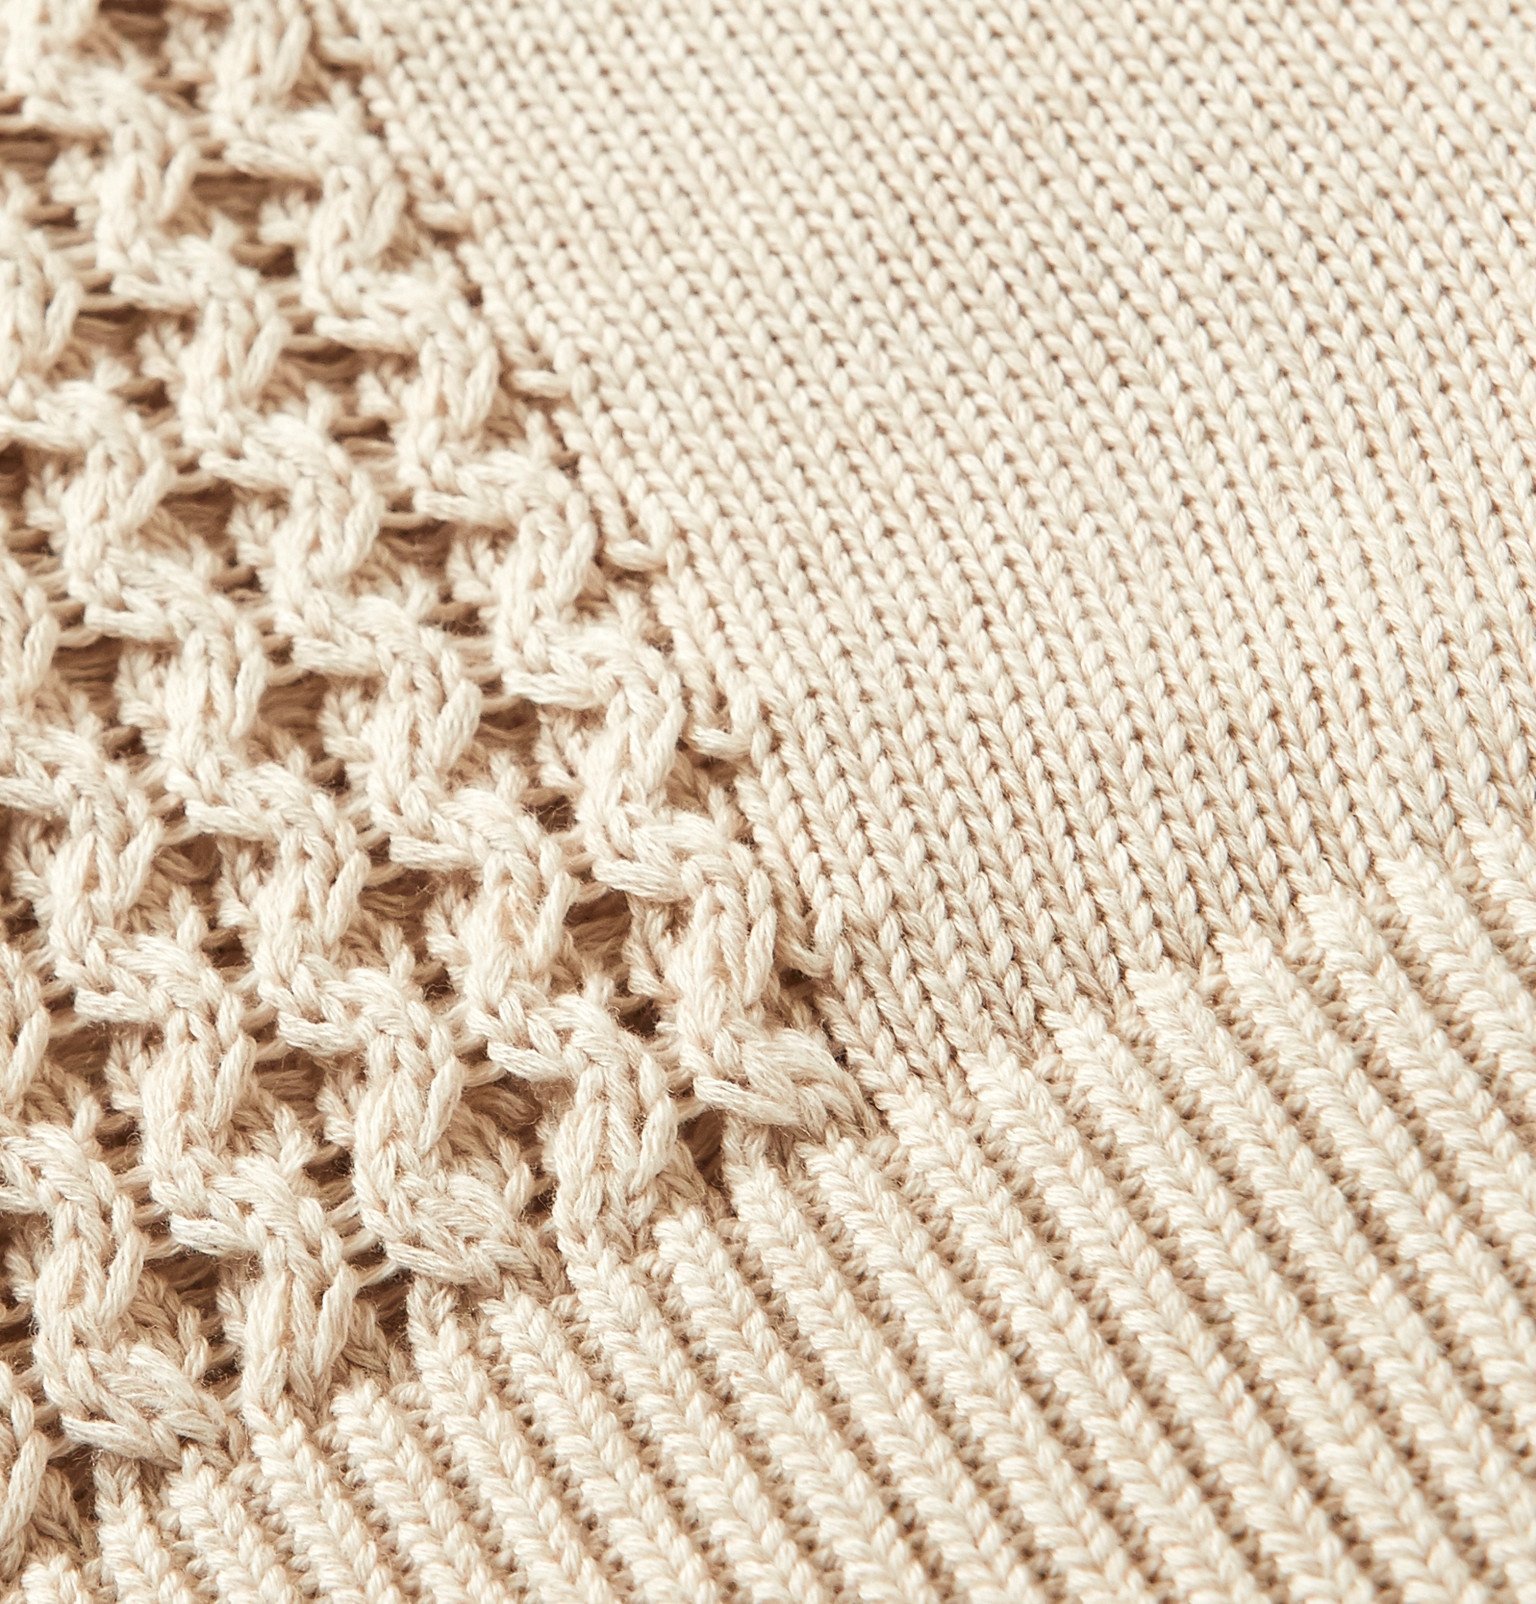 Oliver Spencer - Blenheim Slim-Fit Contrast-Tipped Textured Organic Cotton Sweater - Neutrals